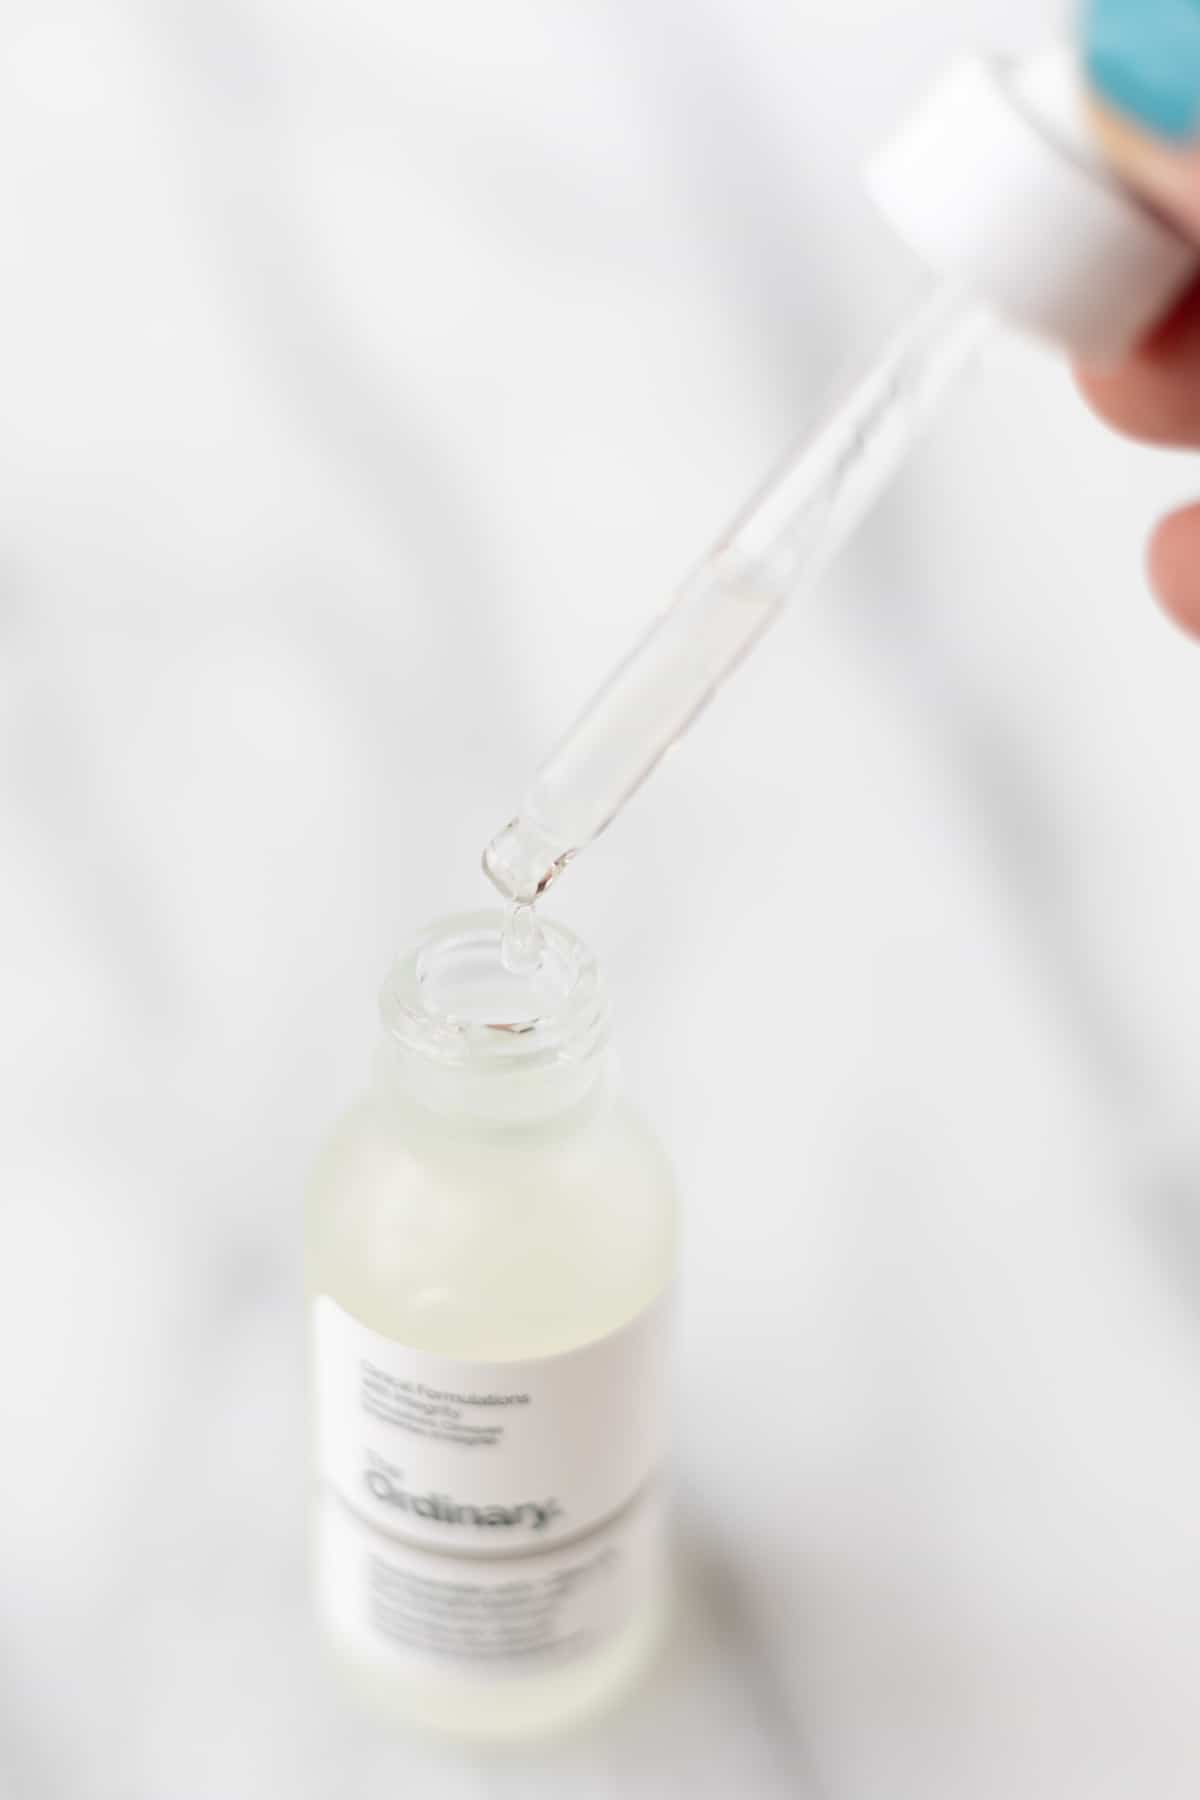 A dropper with a drop of niacinamide coming off of it over a bottle of The Ordinary Niacinamide.